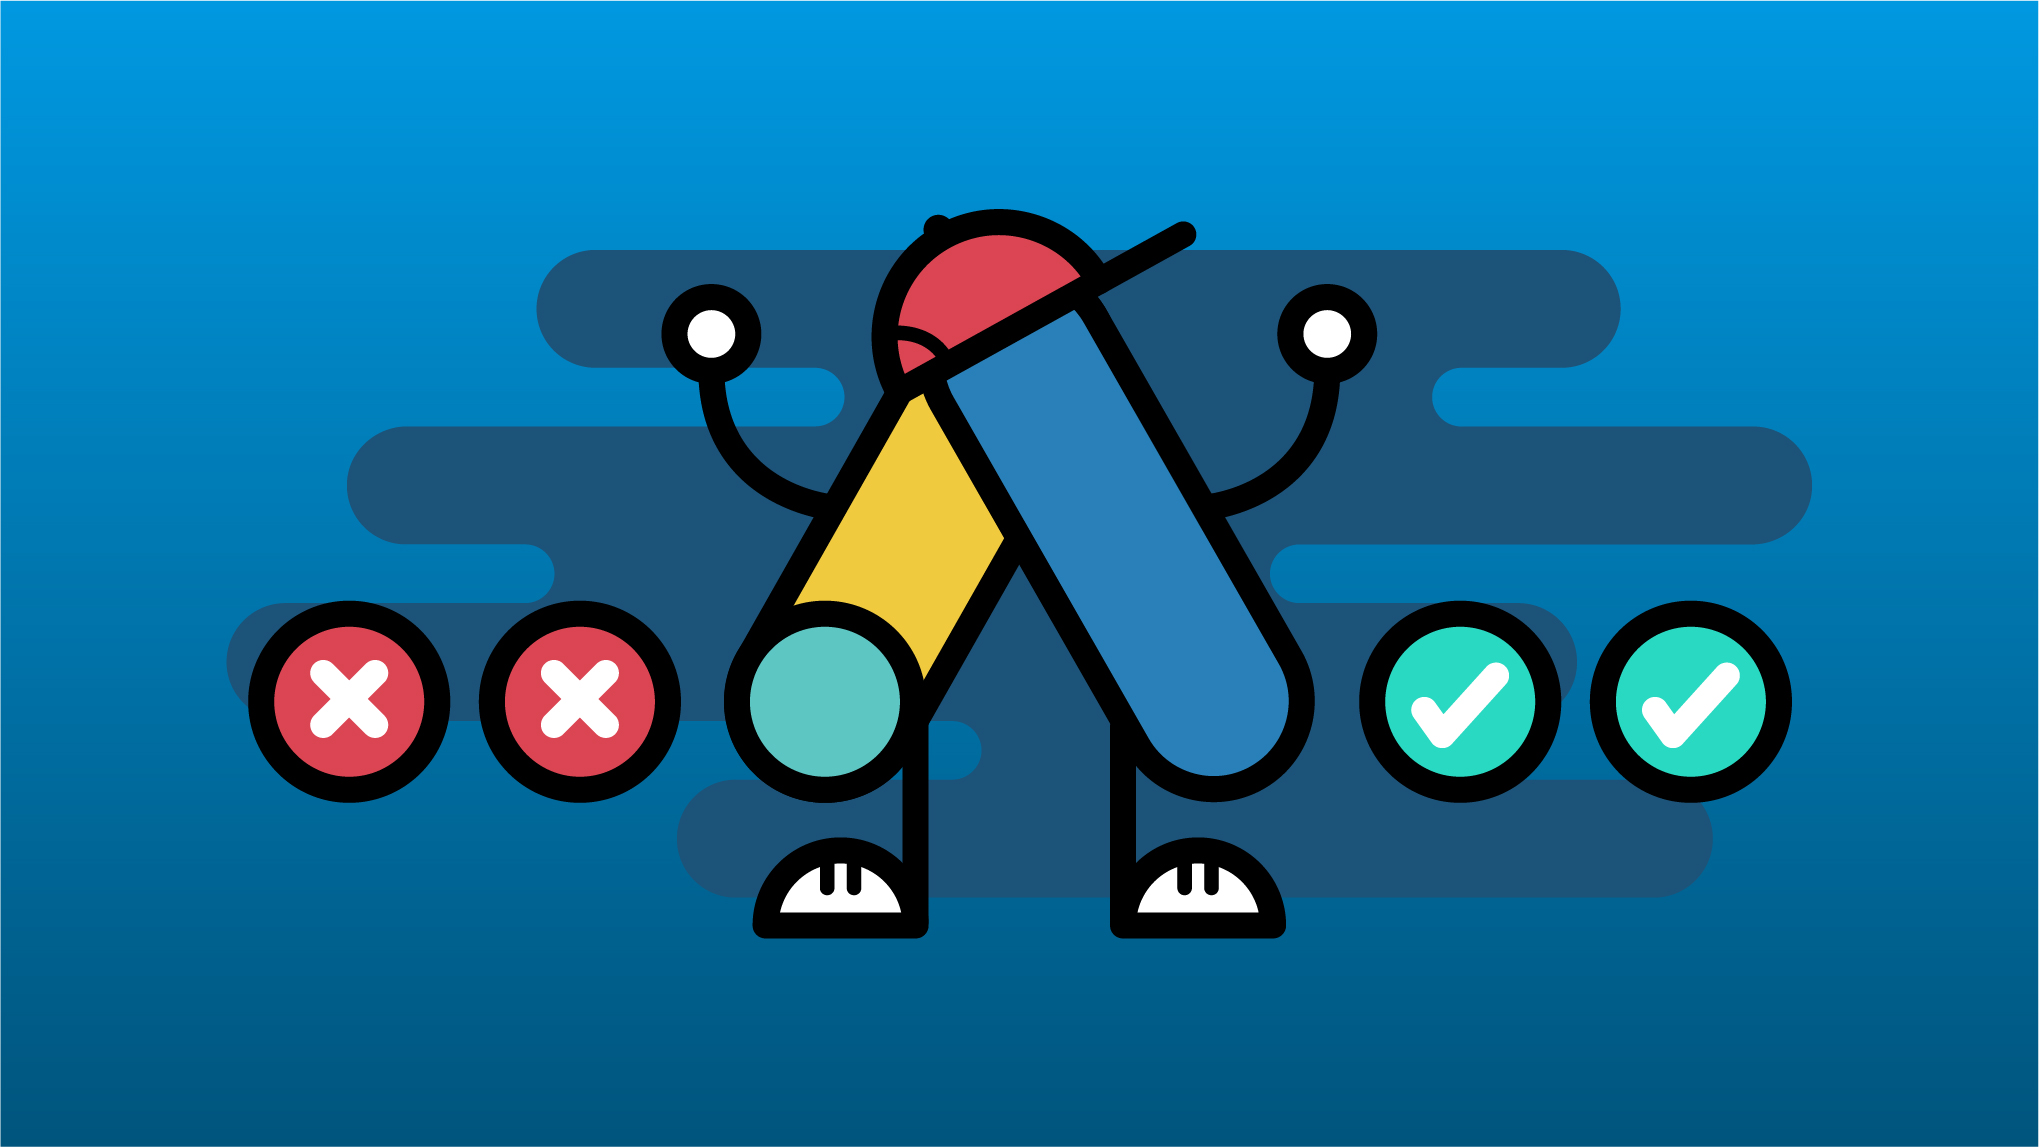 An illustrated version of the Google Analytics icon